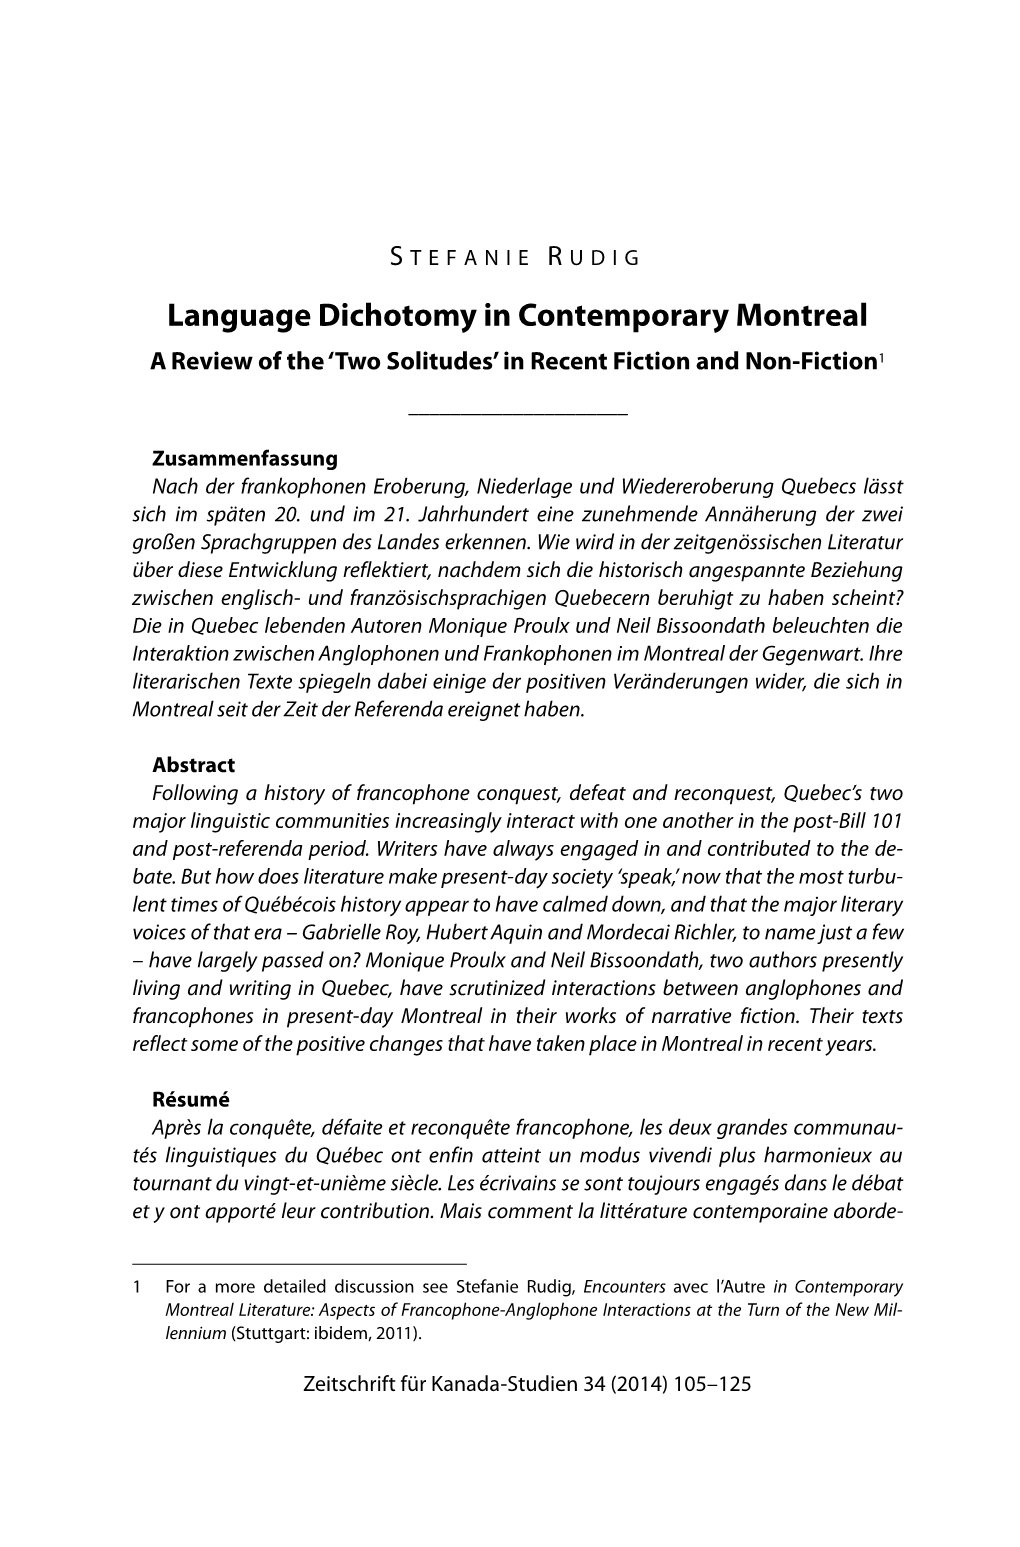 Language Dichotomy in Contemporary Montreal a Review of the ‘Two Solitudes’ in Recent Fiction and Non-Fiction1 ______